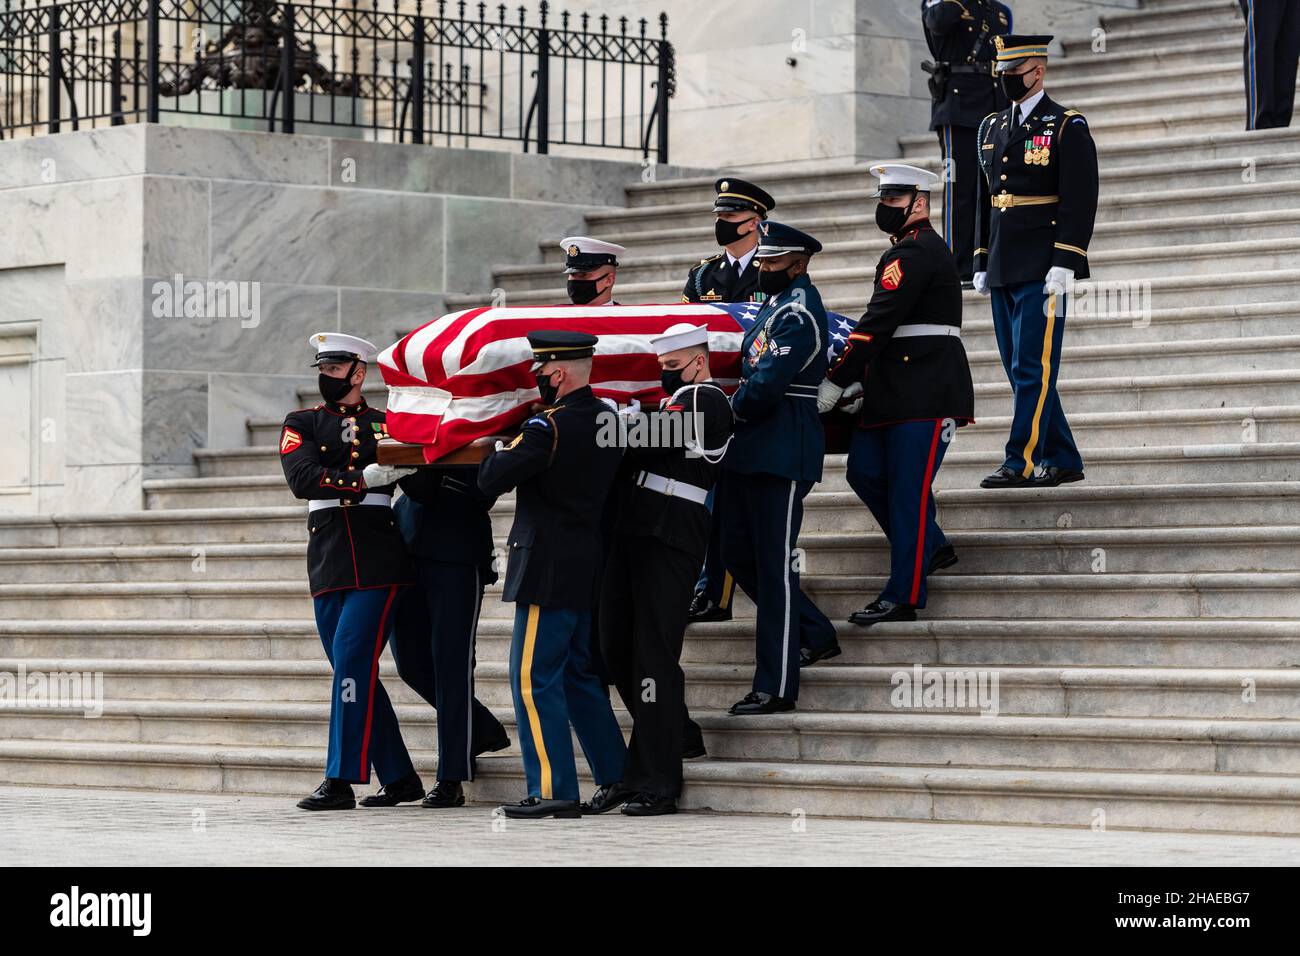 Washington, United States Of America. 10th Dec, 2021. Washington, United States of America. 10 December, 2021. An Armed Forces honor guard carry the remains of World War II veteran and former Senator Robert Dole down the steps of the U.S. Capitol, December 10, 2021 in Washington, DC Senator Dole died at age 98 following a lifetime of service to the nation. Credit: Sgt. Zachery Perkins/U.S. Army/Alamy Live News Stock Photo